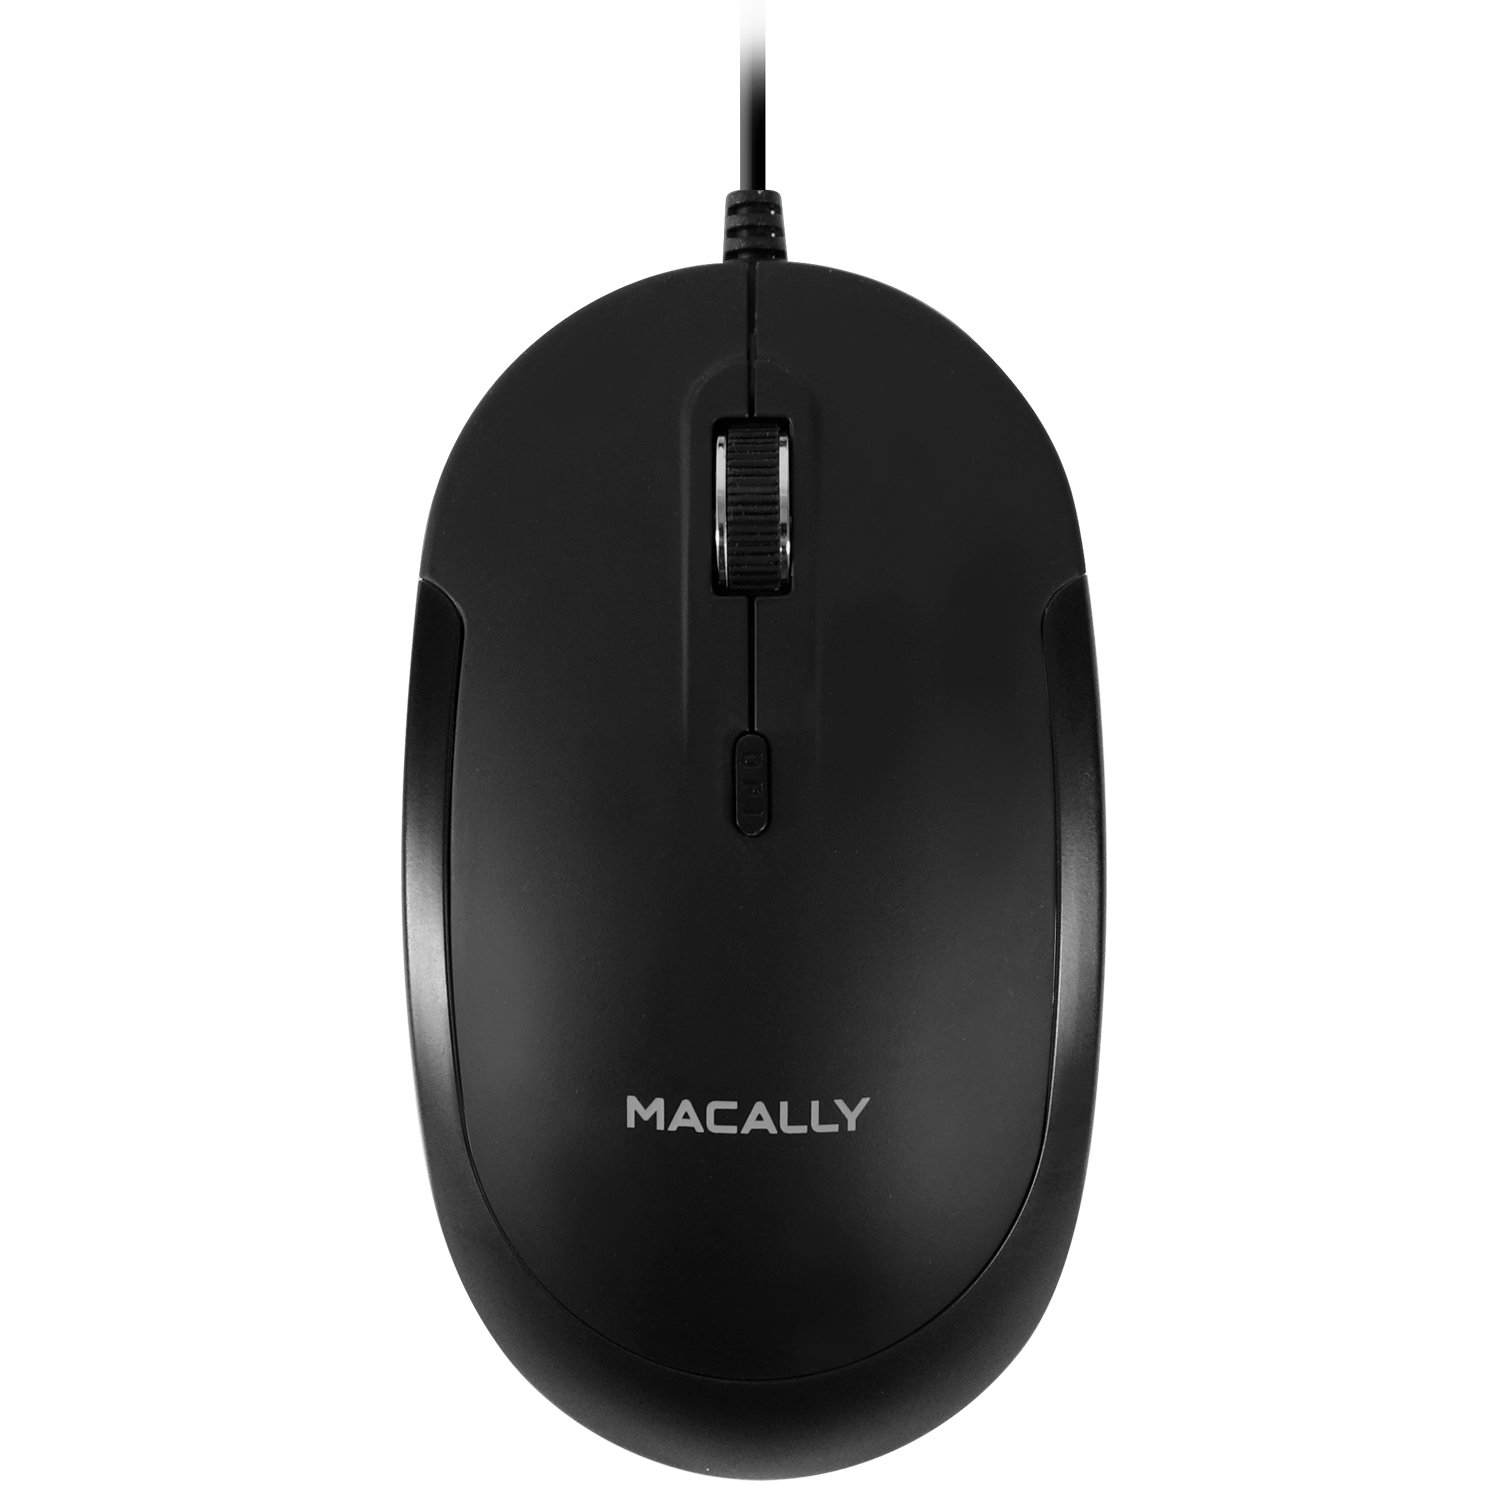 MACALLY DYNAMOUSE Maus, Schwarz